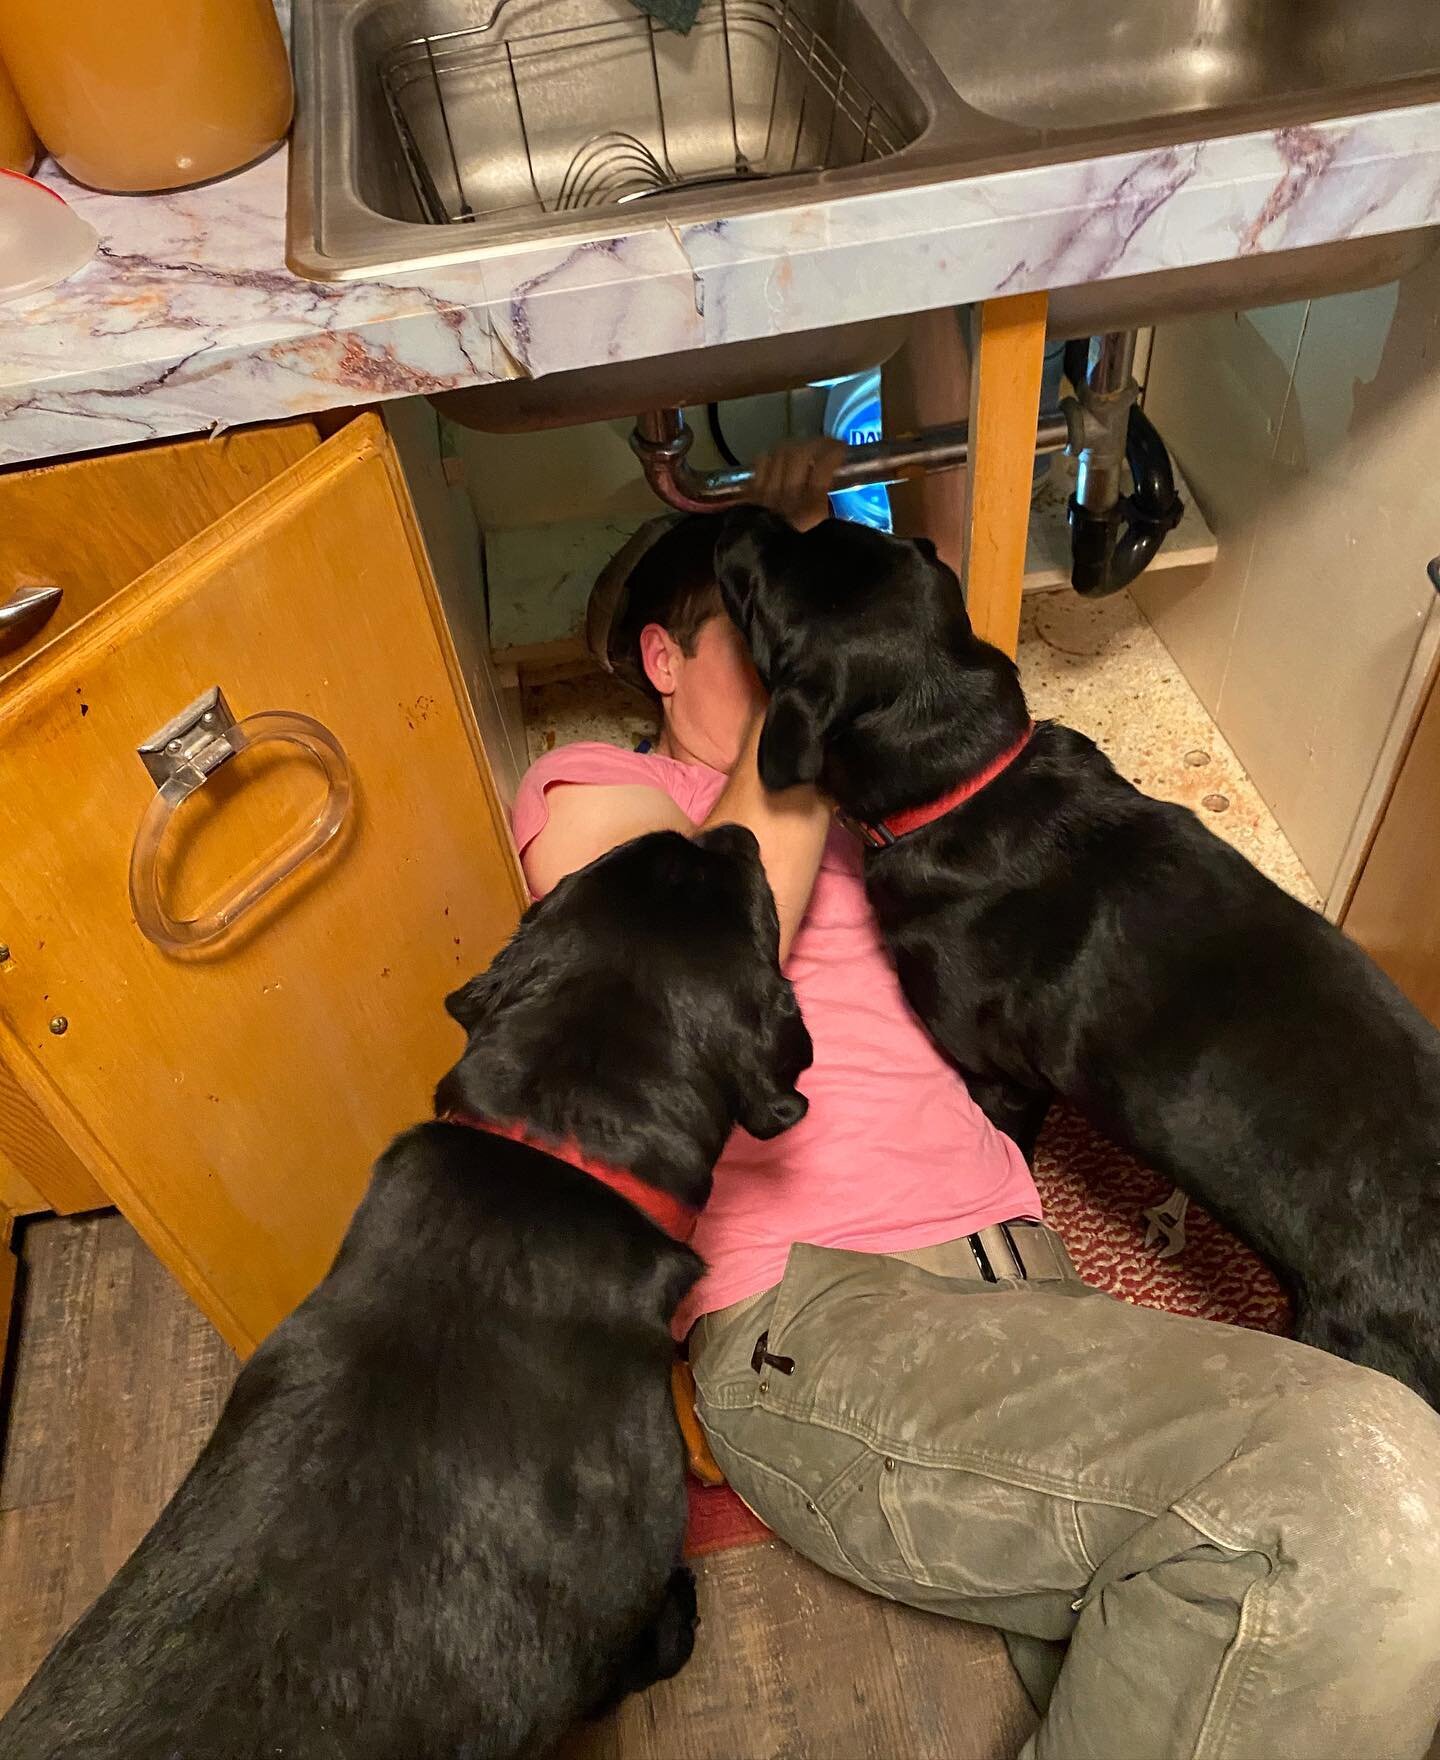 Two very helpful black labs, want in on the action. They might not be as helpful as they think they are. 😉